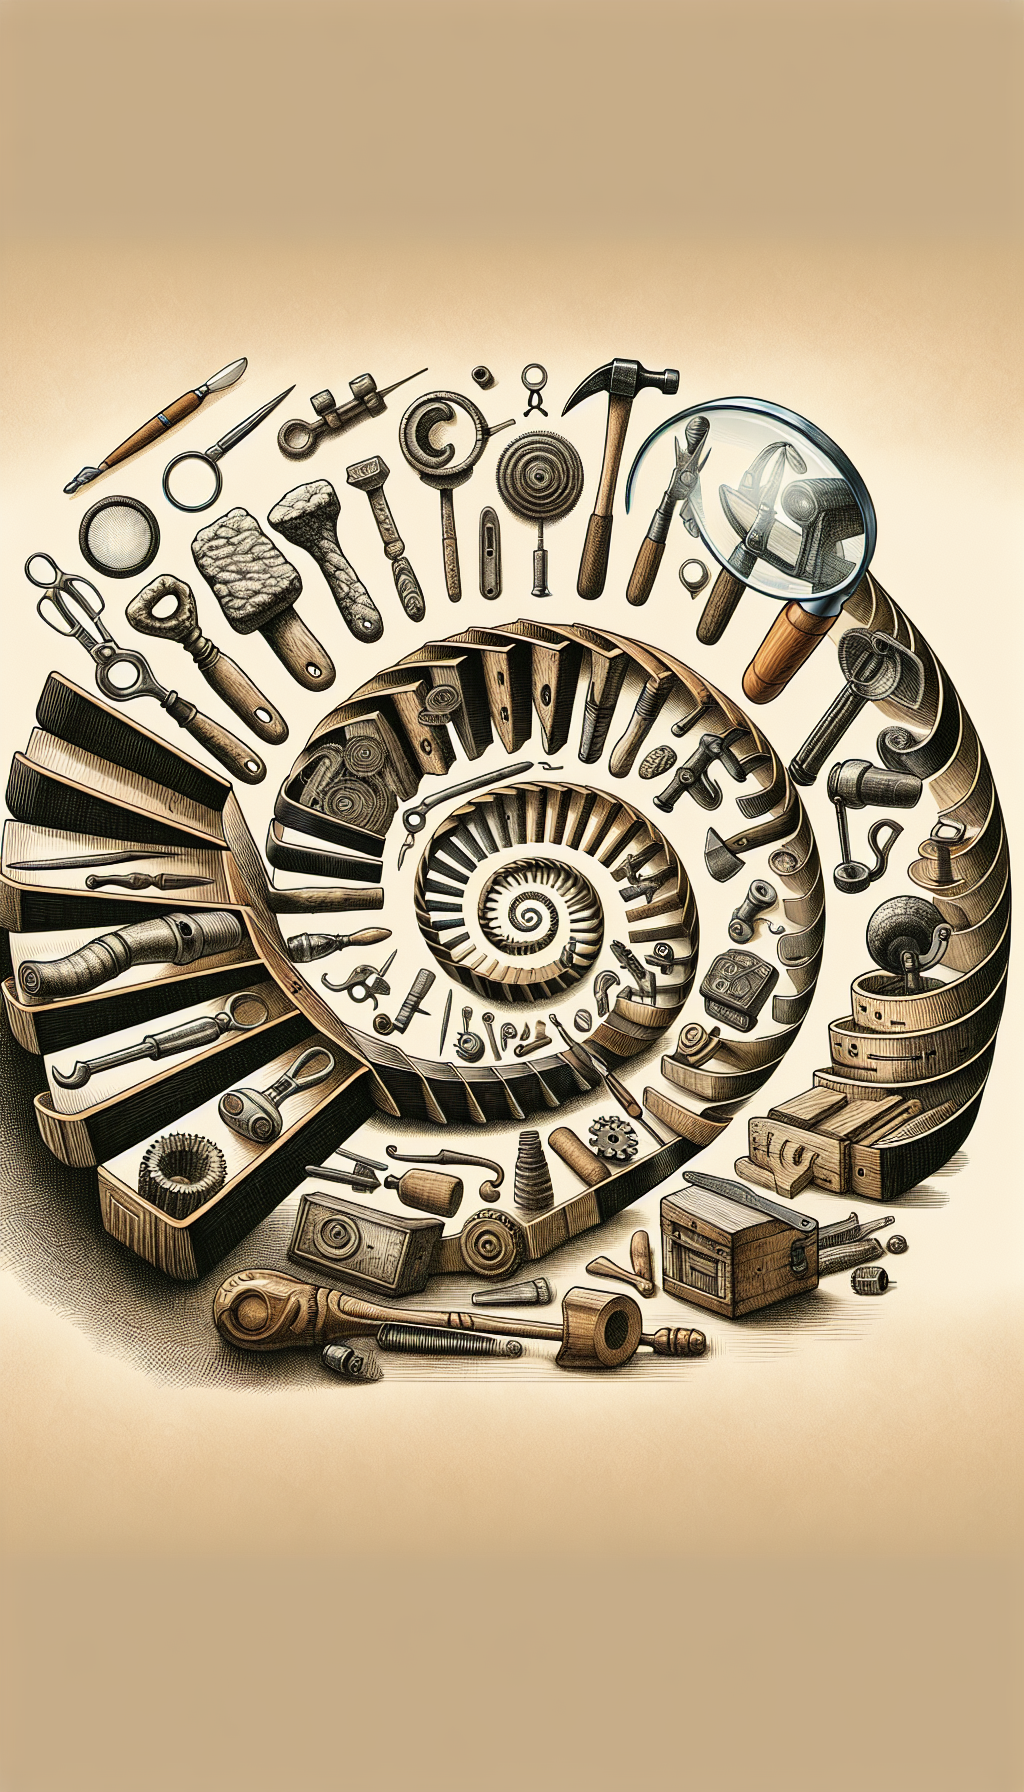 An illustration displaying a spiraling timeline unfurling like a carpenter's tape measure, featuring iconic tools from different eras gradually morphing from primitive to modern versions. Along the spiral, magnifying glasses hover, pinpointing antique tools, each highlighted with a distinct artistic style—stone tools sketched in charcoal, medieval ironwork in etching, and Victorian gears in sepia tones.